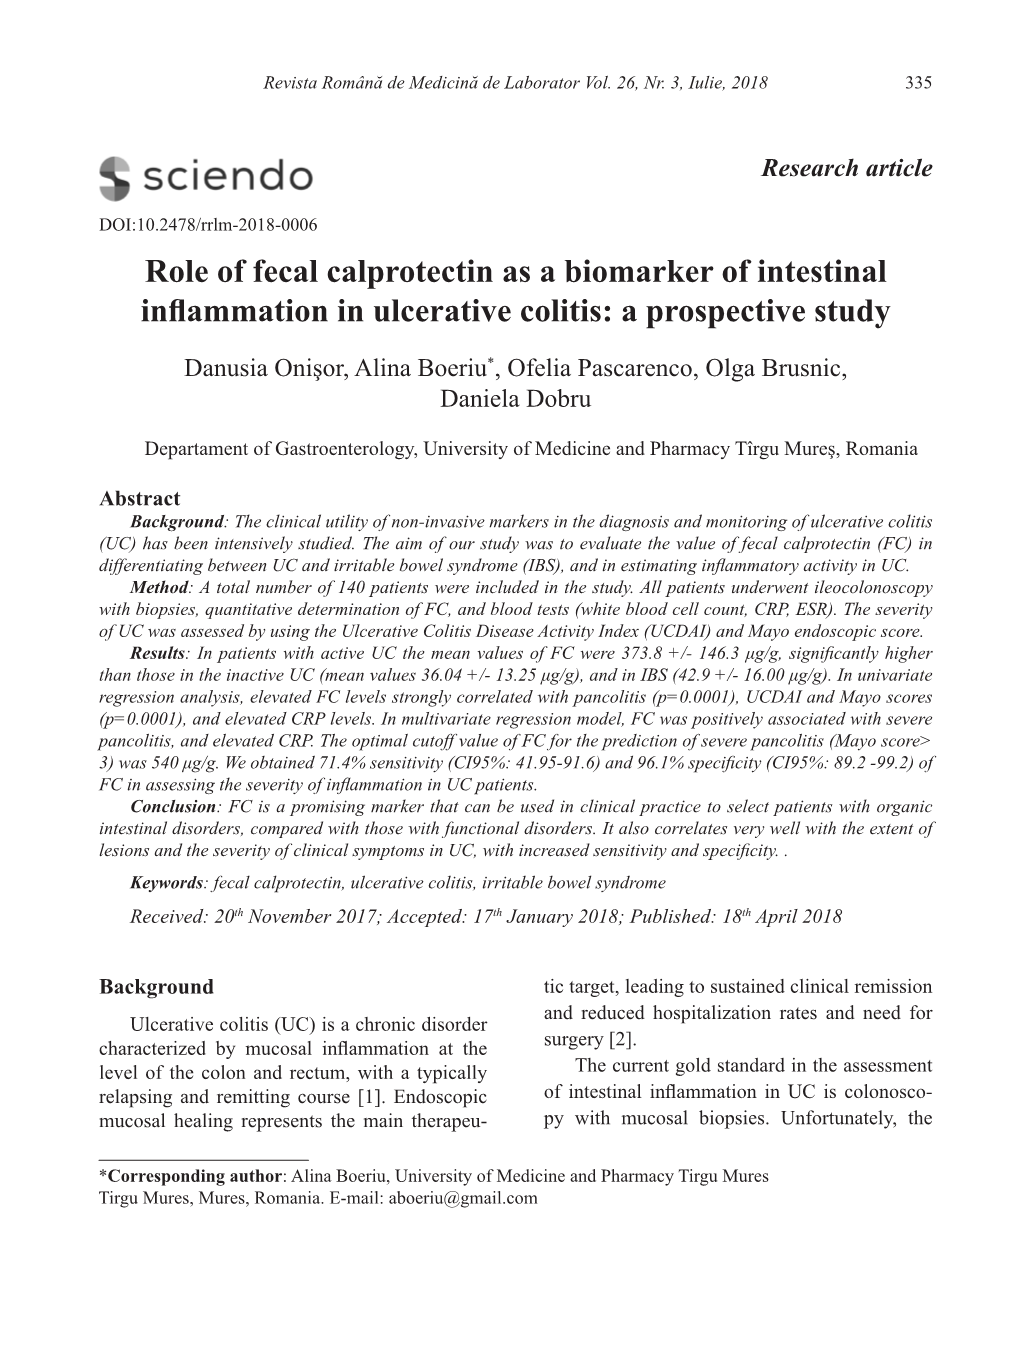 Role of Fecal Calprotectin As a Biomarker of Intestinal Inflammation in Ulcerative Colitis: a Prospective Study